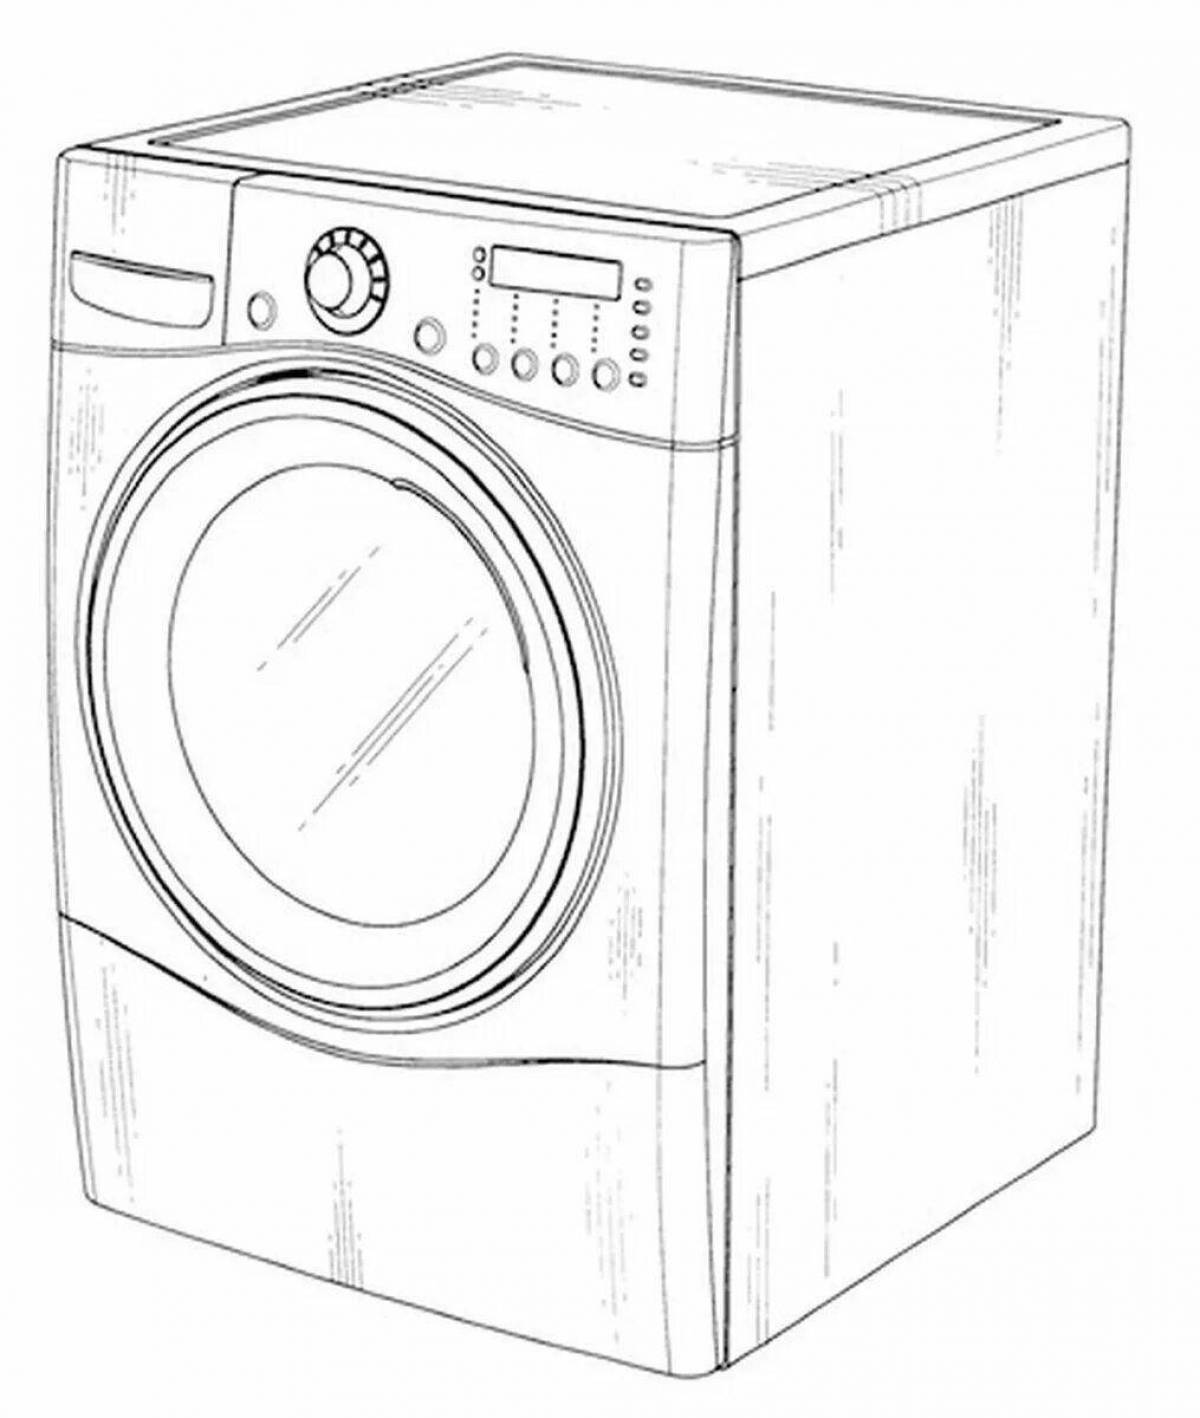 Adorable washing machine coloring book for preschoolers